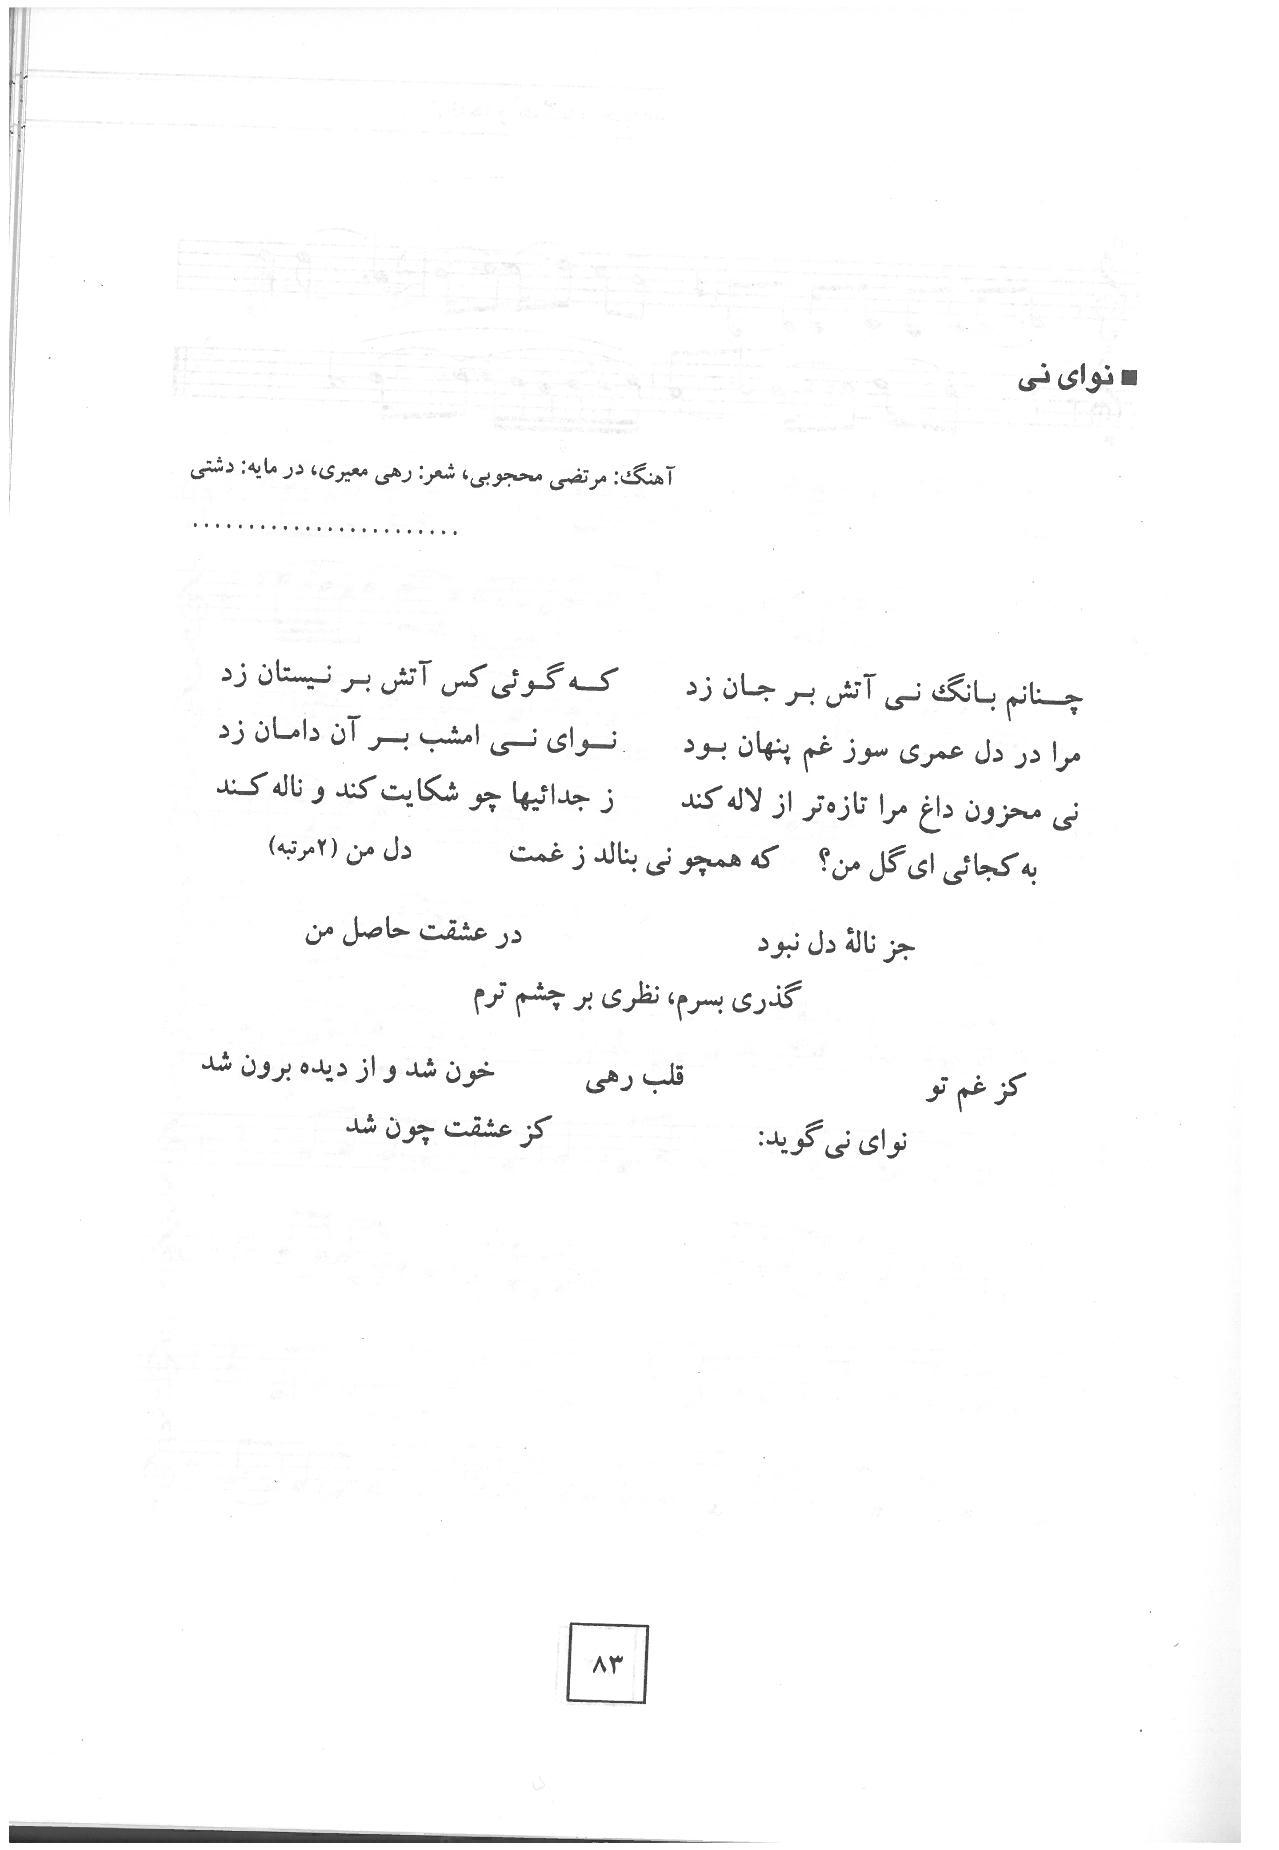 A letter written in arabic and english.